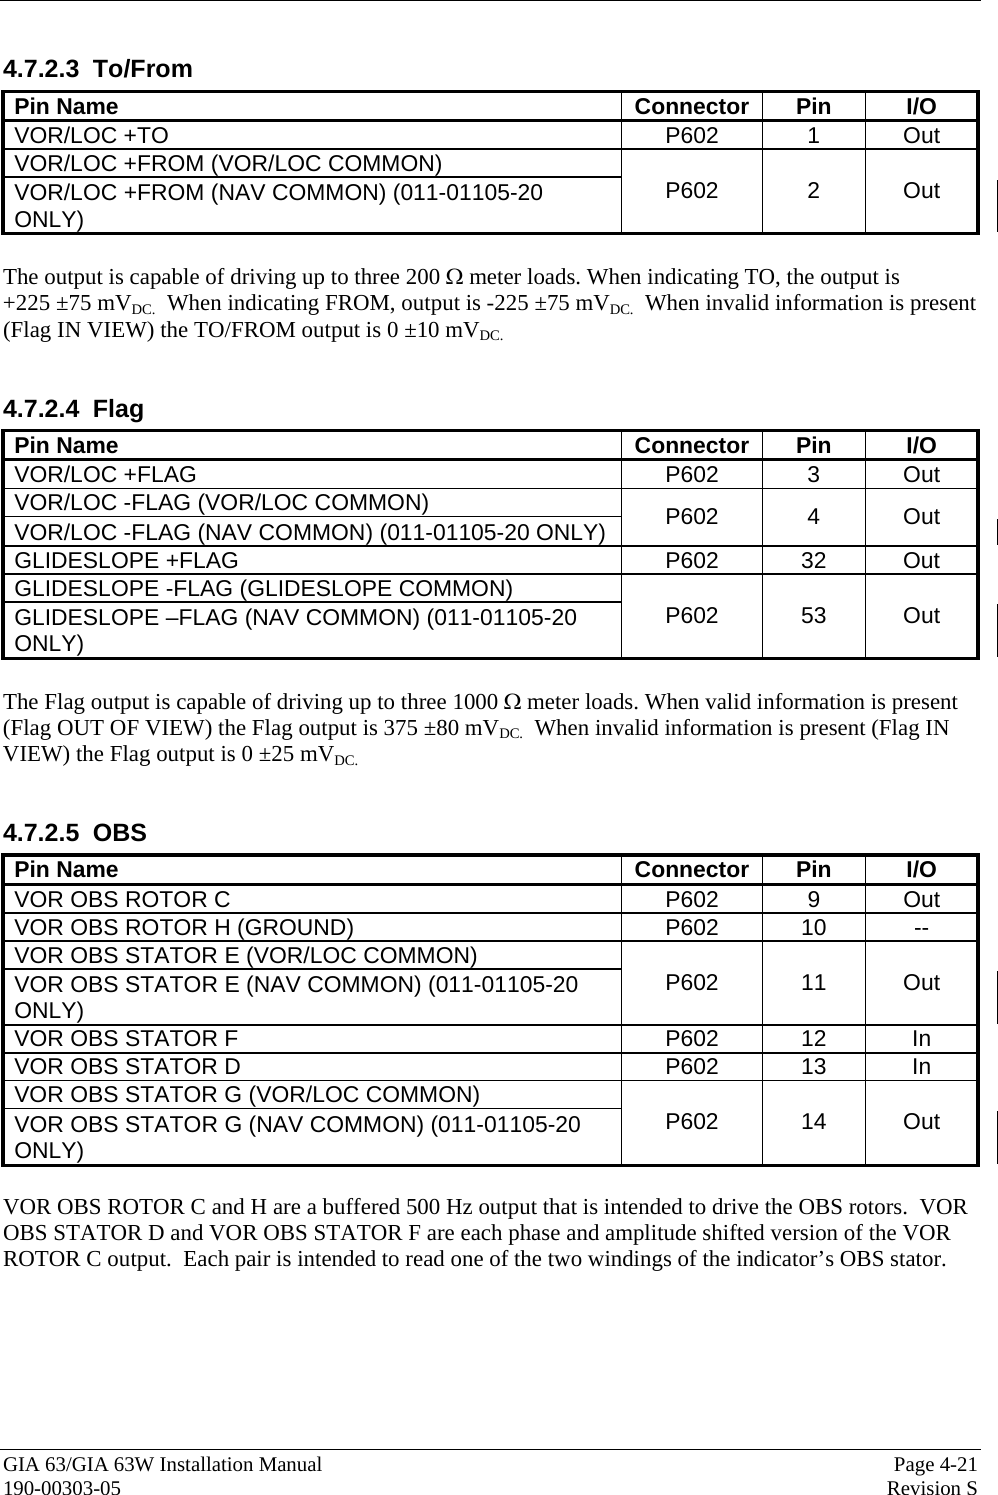  GIA 63/GIA 63W Installation Manual  Page 4-21 190-00303-05  Revision S 4.7.2.3 To/From Pin Name  Connector  Pin  I/O VOR/LOC +TO  P602  1  Out VOR/LOC +FROM (VOR/LOC COMMON)  VOR/LOC +FROM (NAV COMMON) (011-01105-20 ONLY) P602 2 Out  The output is capable of driving up to three 200 Ω meter loads. When indicating TO, the output is +225 ±75 mVDC.  When indicating FROM, output is -225 ±75 mVDC.  When invalid information is present (Flag IN VIEW) the TO/FROM output is 0 ±10 mVDC.  4.7.2.4 Flag Pin Name  Connector  Pin  I/O VOR/LOC +FLAG  P602  3  Out VOR/LOC -FLAG (VOR/LOC COMMON)  VOR/LOC -FLAG (NAV COMMON) (011-01105-20 ONLY)  P602 4 Out GLIDESLOPE +FLAG  P602  32  Out GLIDESLOPE -FLAG (GLIDESLOPE COMMON) GLIDESLOPE –FLAG (NAV COMMON) (011-01105-20 ONLY) P602 53 Out  The Flag output is capable of driving up to three 1000 Ω meter loads. When valid information is present (Flag OUT OF VIEW) the Flag output is 375 ±80 mVDC.  When invalid information is present (Flag IN VIEW) the Flag output is 0 ±25 mVDC.  4.7.2.5 OBS Pin Name  Connector  Pin  I/O VOR OBS ROTOR C  P602  9  Out VOR OBS ROTOR H (GROUND)  P602  10  -- VOR OBS STATOR E (VOR/LOC COMMON) VOR OBS STATOR E (NAV COMMON) (011-01105-20 ONLY) P602 11 Out VOR OBS STATOR F  P602  12  In VOR OBS STATOR D  P602  13  In VOR OBS STATOR G (VOR/LOC COMMON) VOR OBS STATOR G (NAV COMMON) (011-01105-20 ONLY) P602 14 Out  VOR OBS ROTOR C and H are a buffered 500 Hz output that is intended to drive the OBS rotors.  VOR OBS STATOR D and VOR OBS STATOR F are each phase and amplitude shifted version of the VOR ROTOR C output.  Each pair is intended to read one of the two windings of the indicator’s OBS stator. 